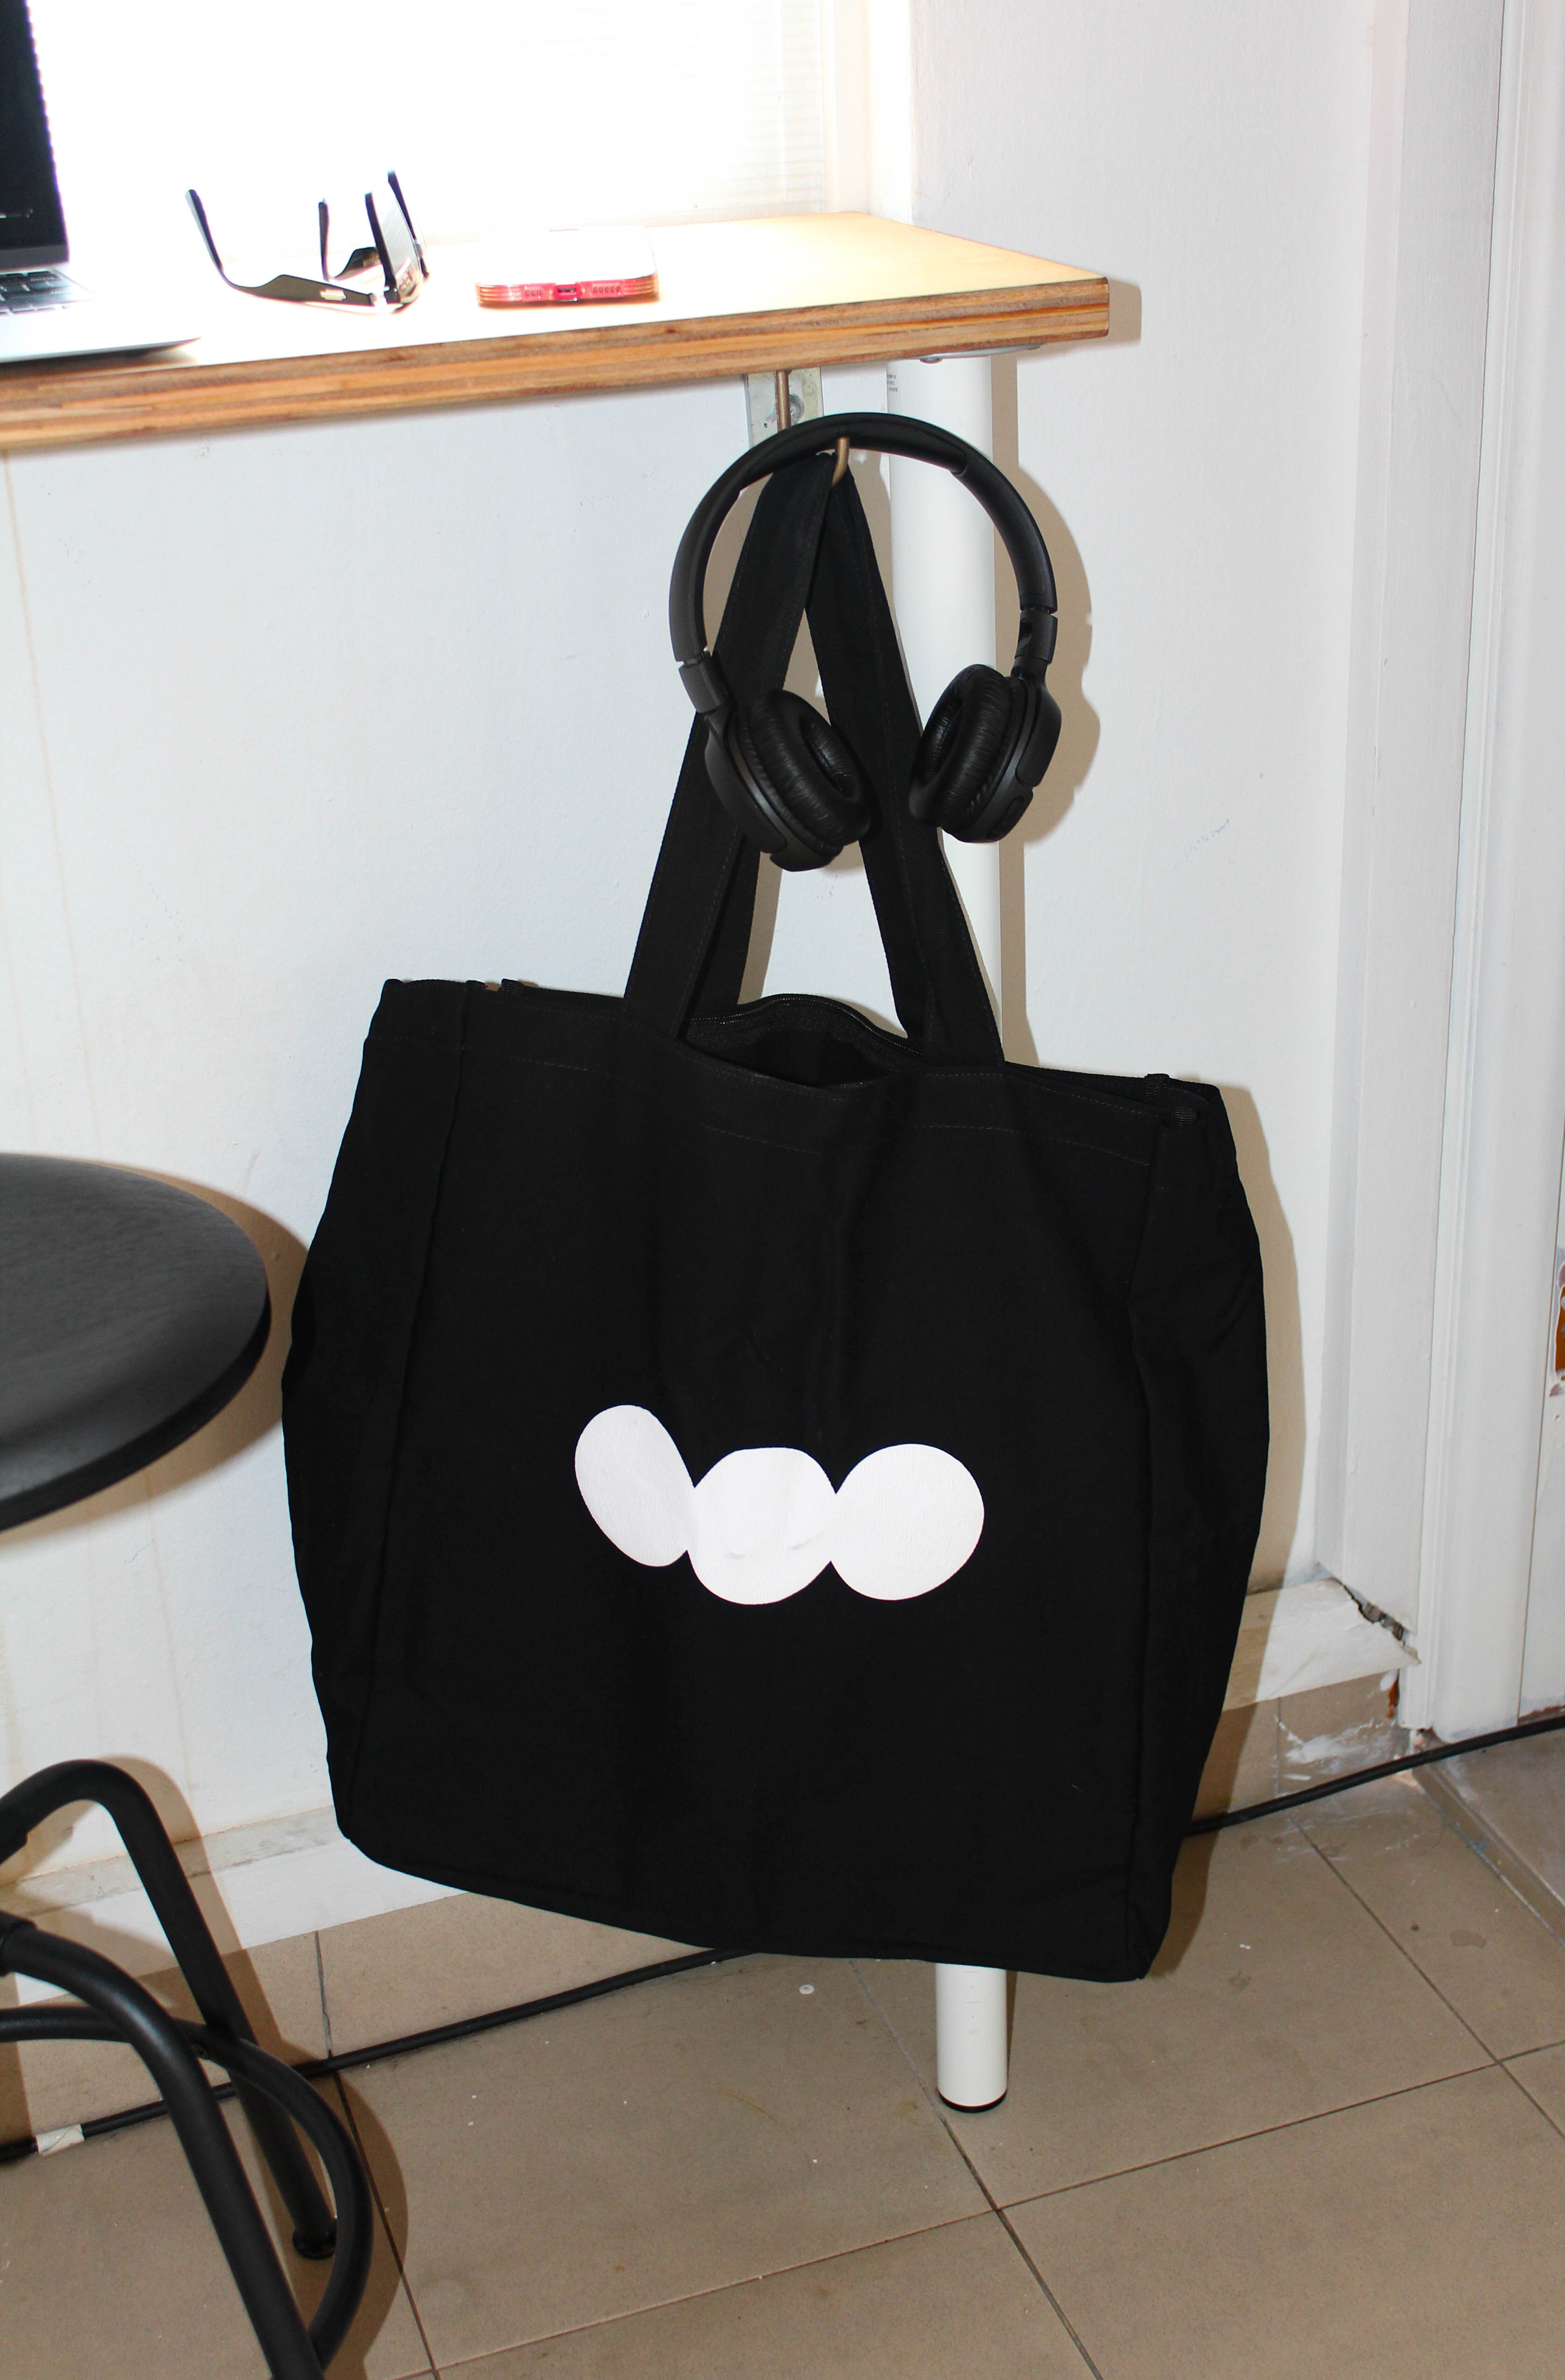 Spin-off Tote XL - Canvas Black